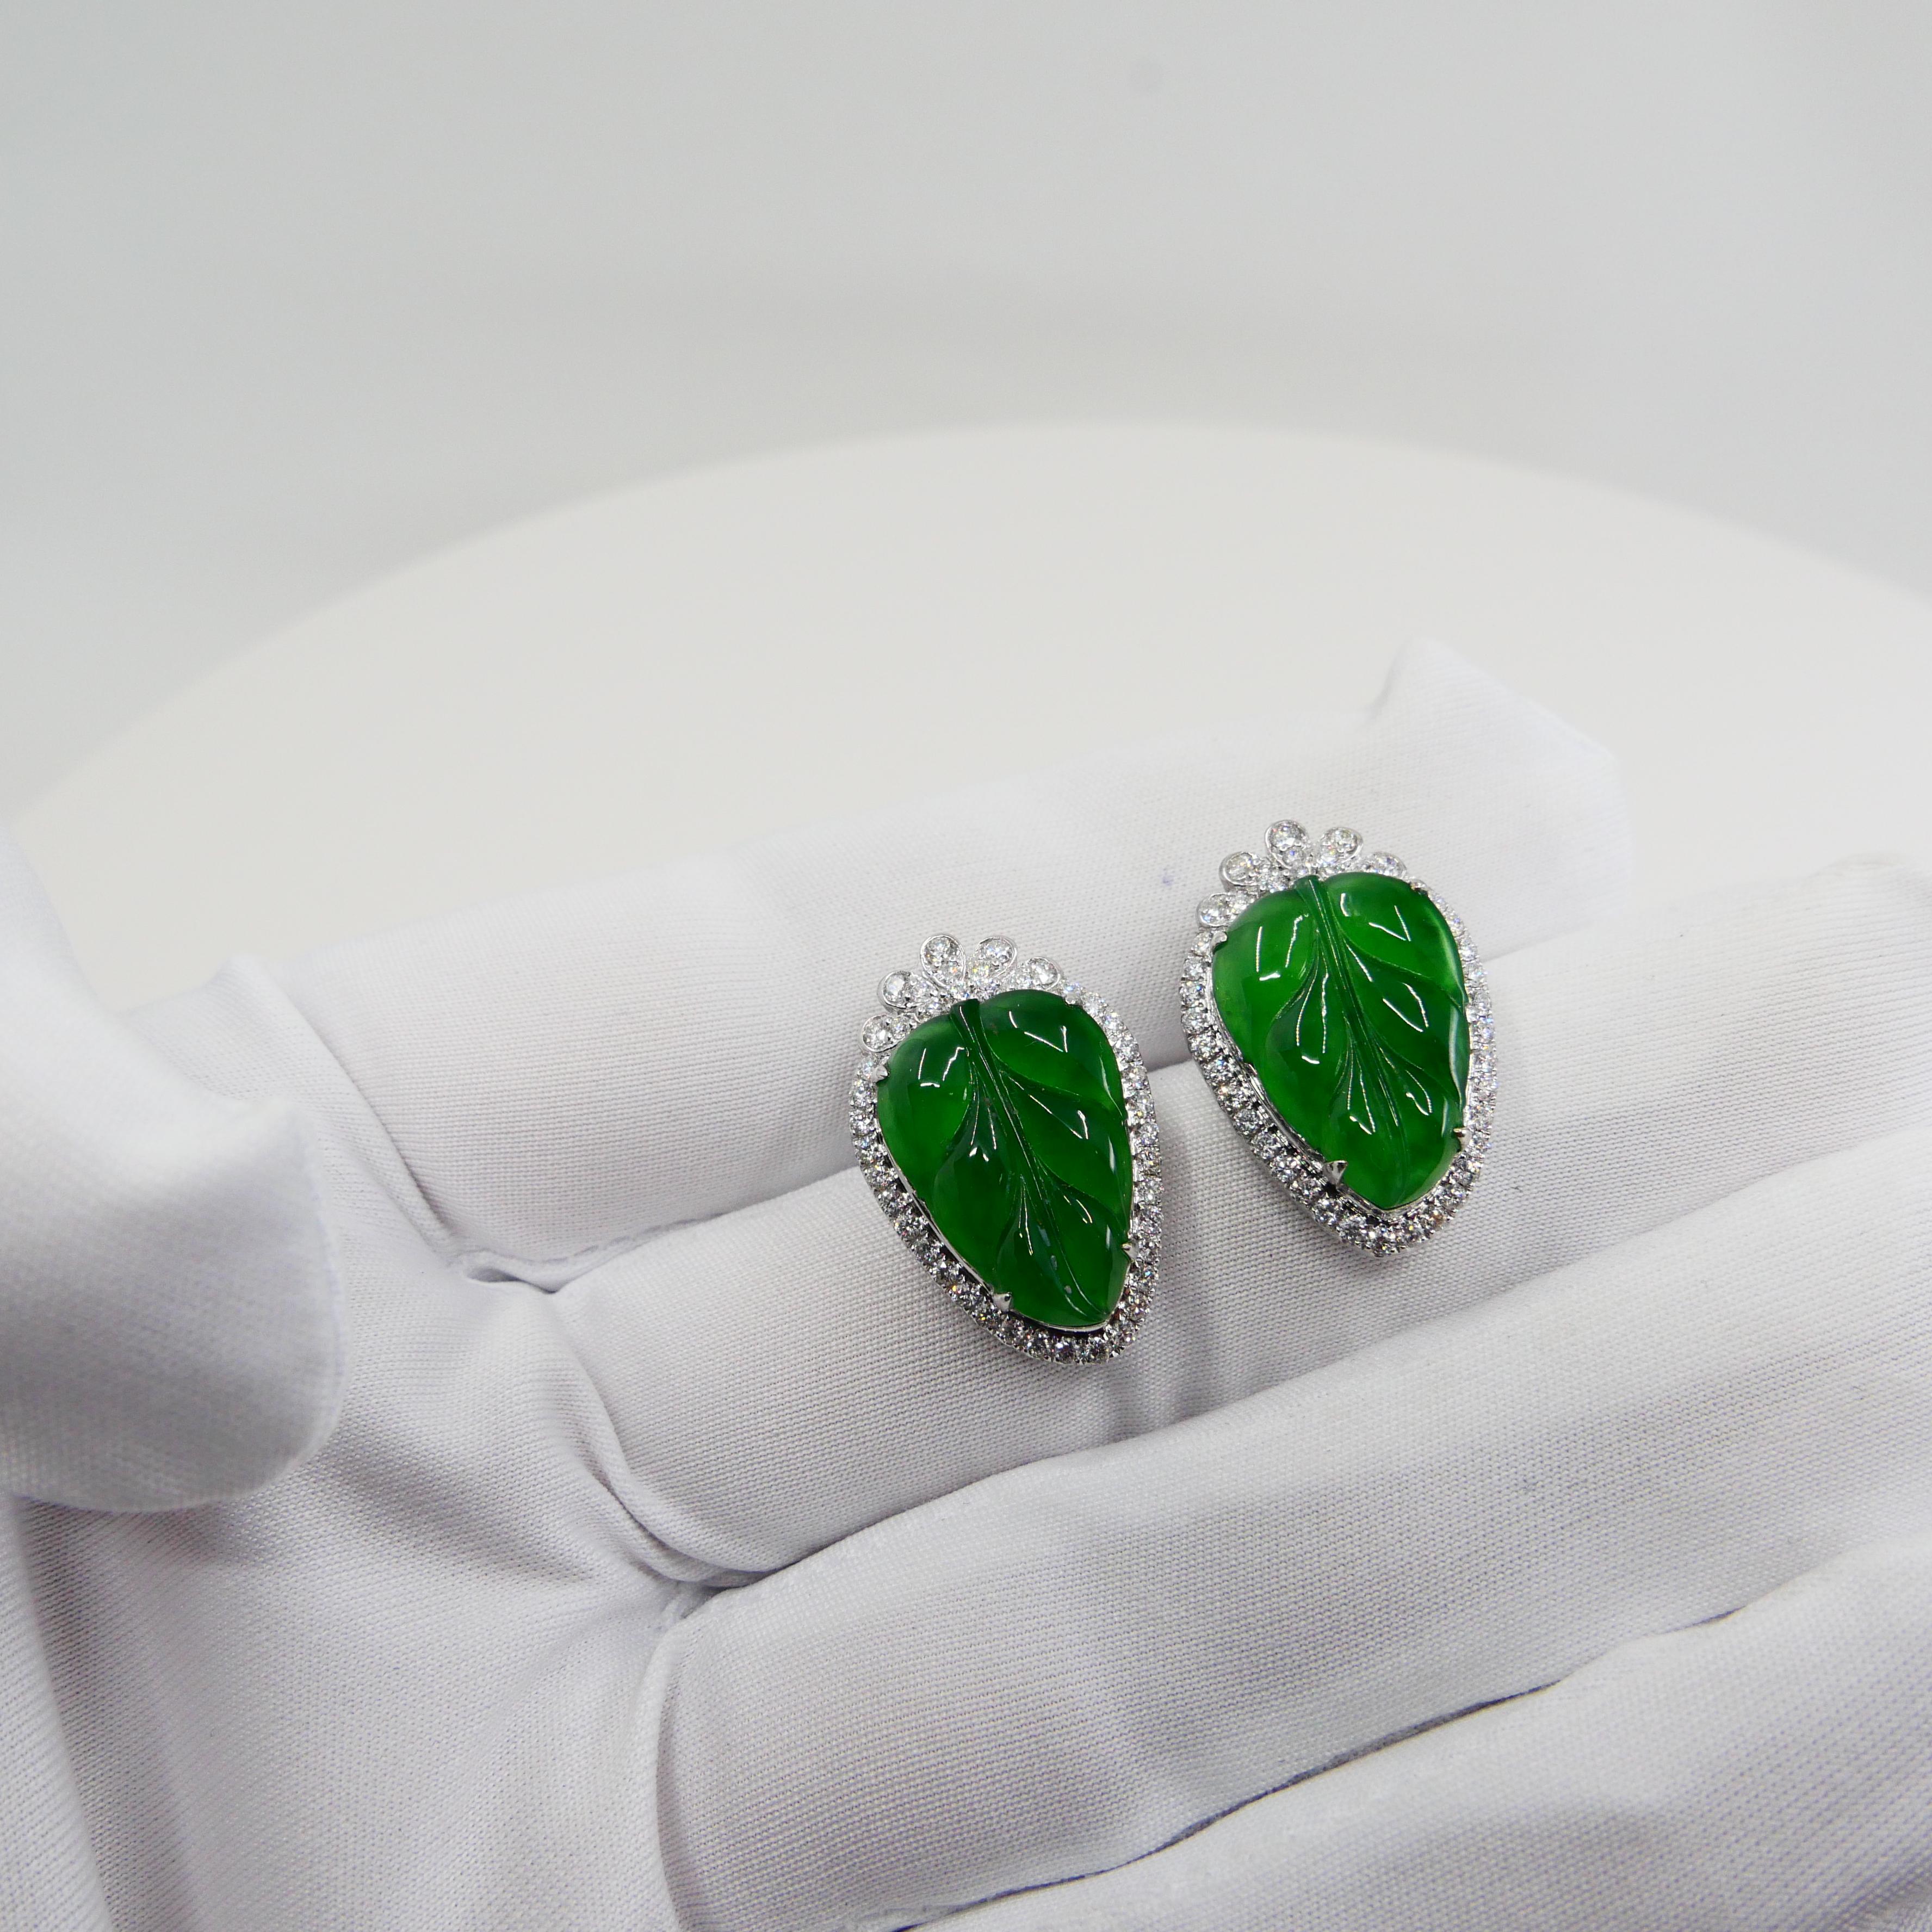 Certified Icy Imperial Green Jade and Diamond Earrings, Collector's Quality For Sale 1